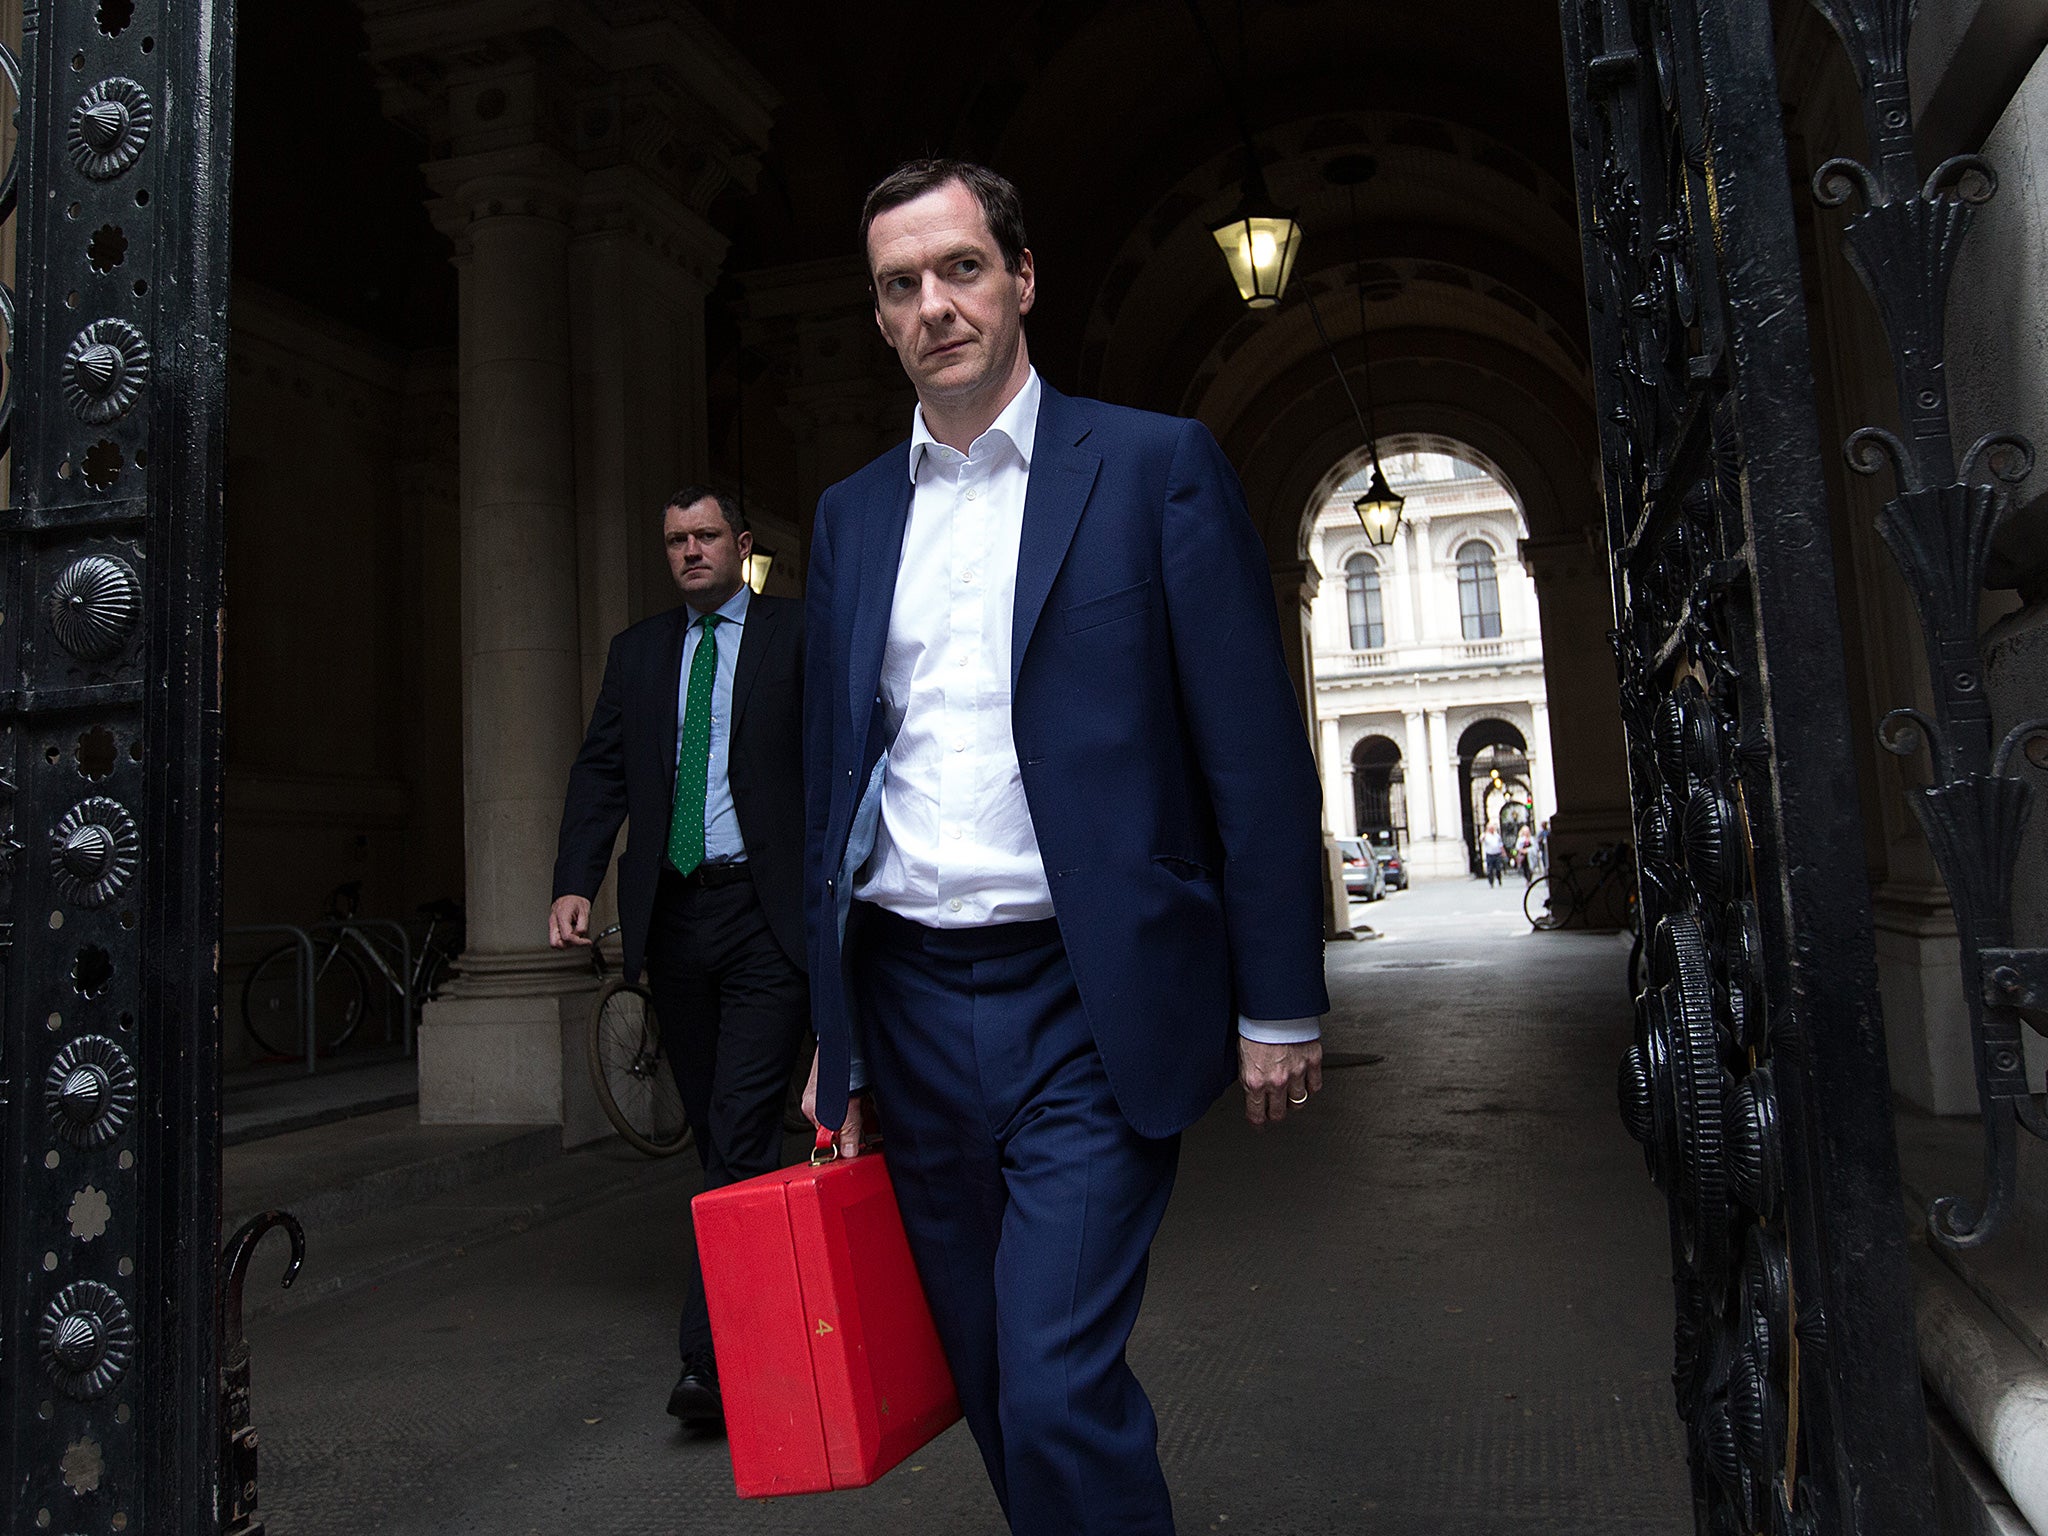 George Osborne has stepped up his private meetings with representatives of the UK’s big banks since the general election